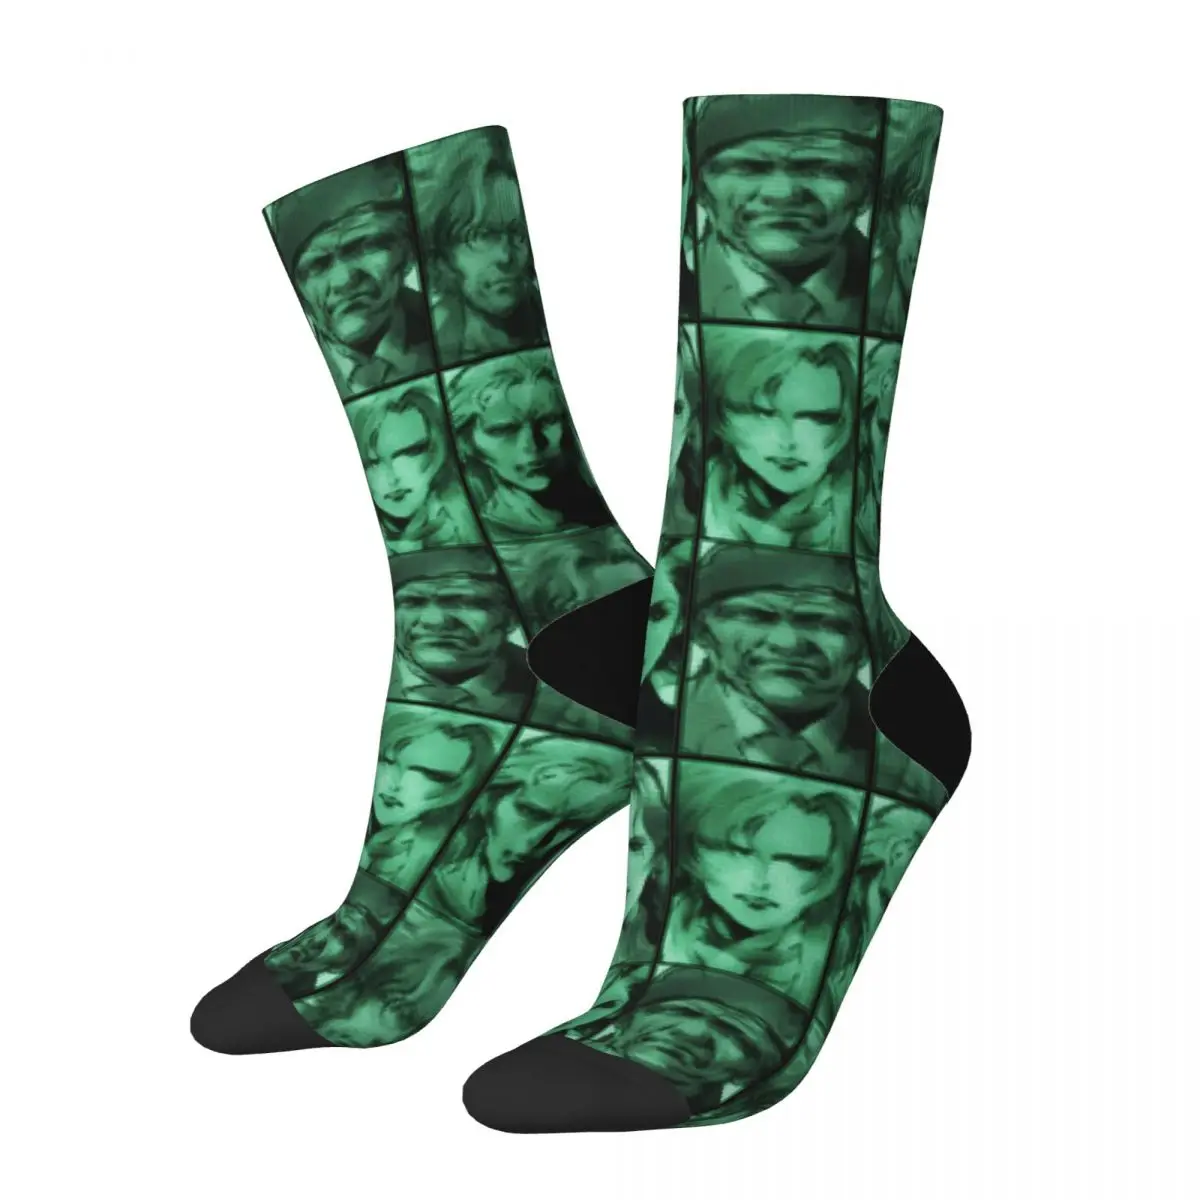 Retro Metal Gear Solid Codec Portraits Basketball Socks Video Game Polyester Long Socks for Unisex Breathable - Metal Gear Solid Store